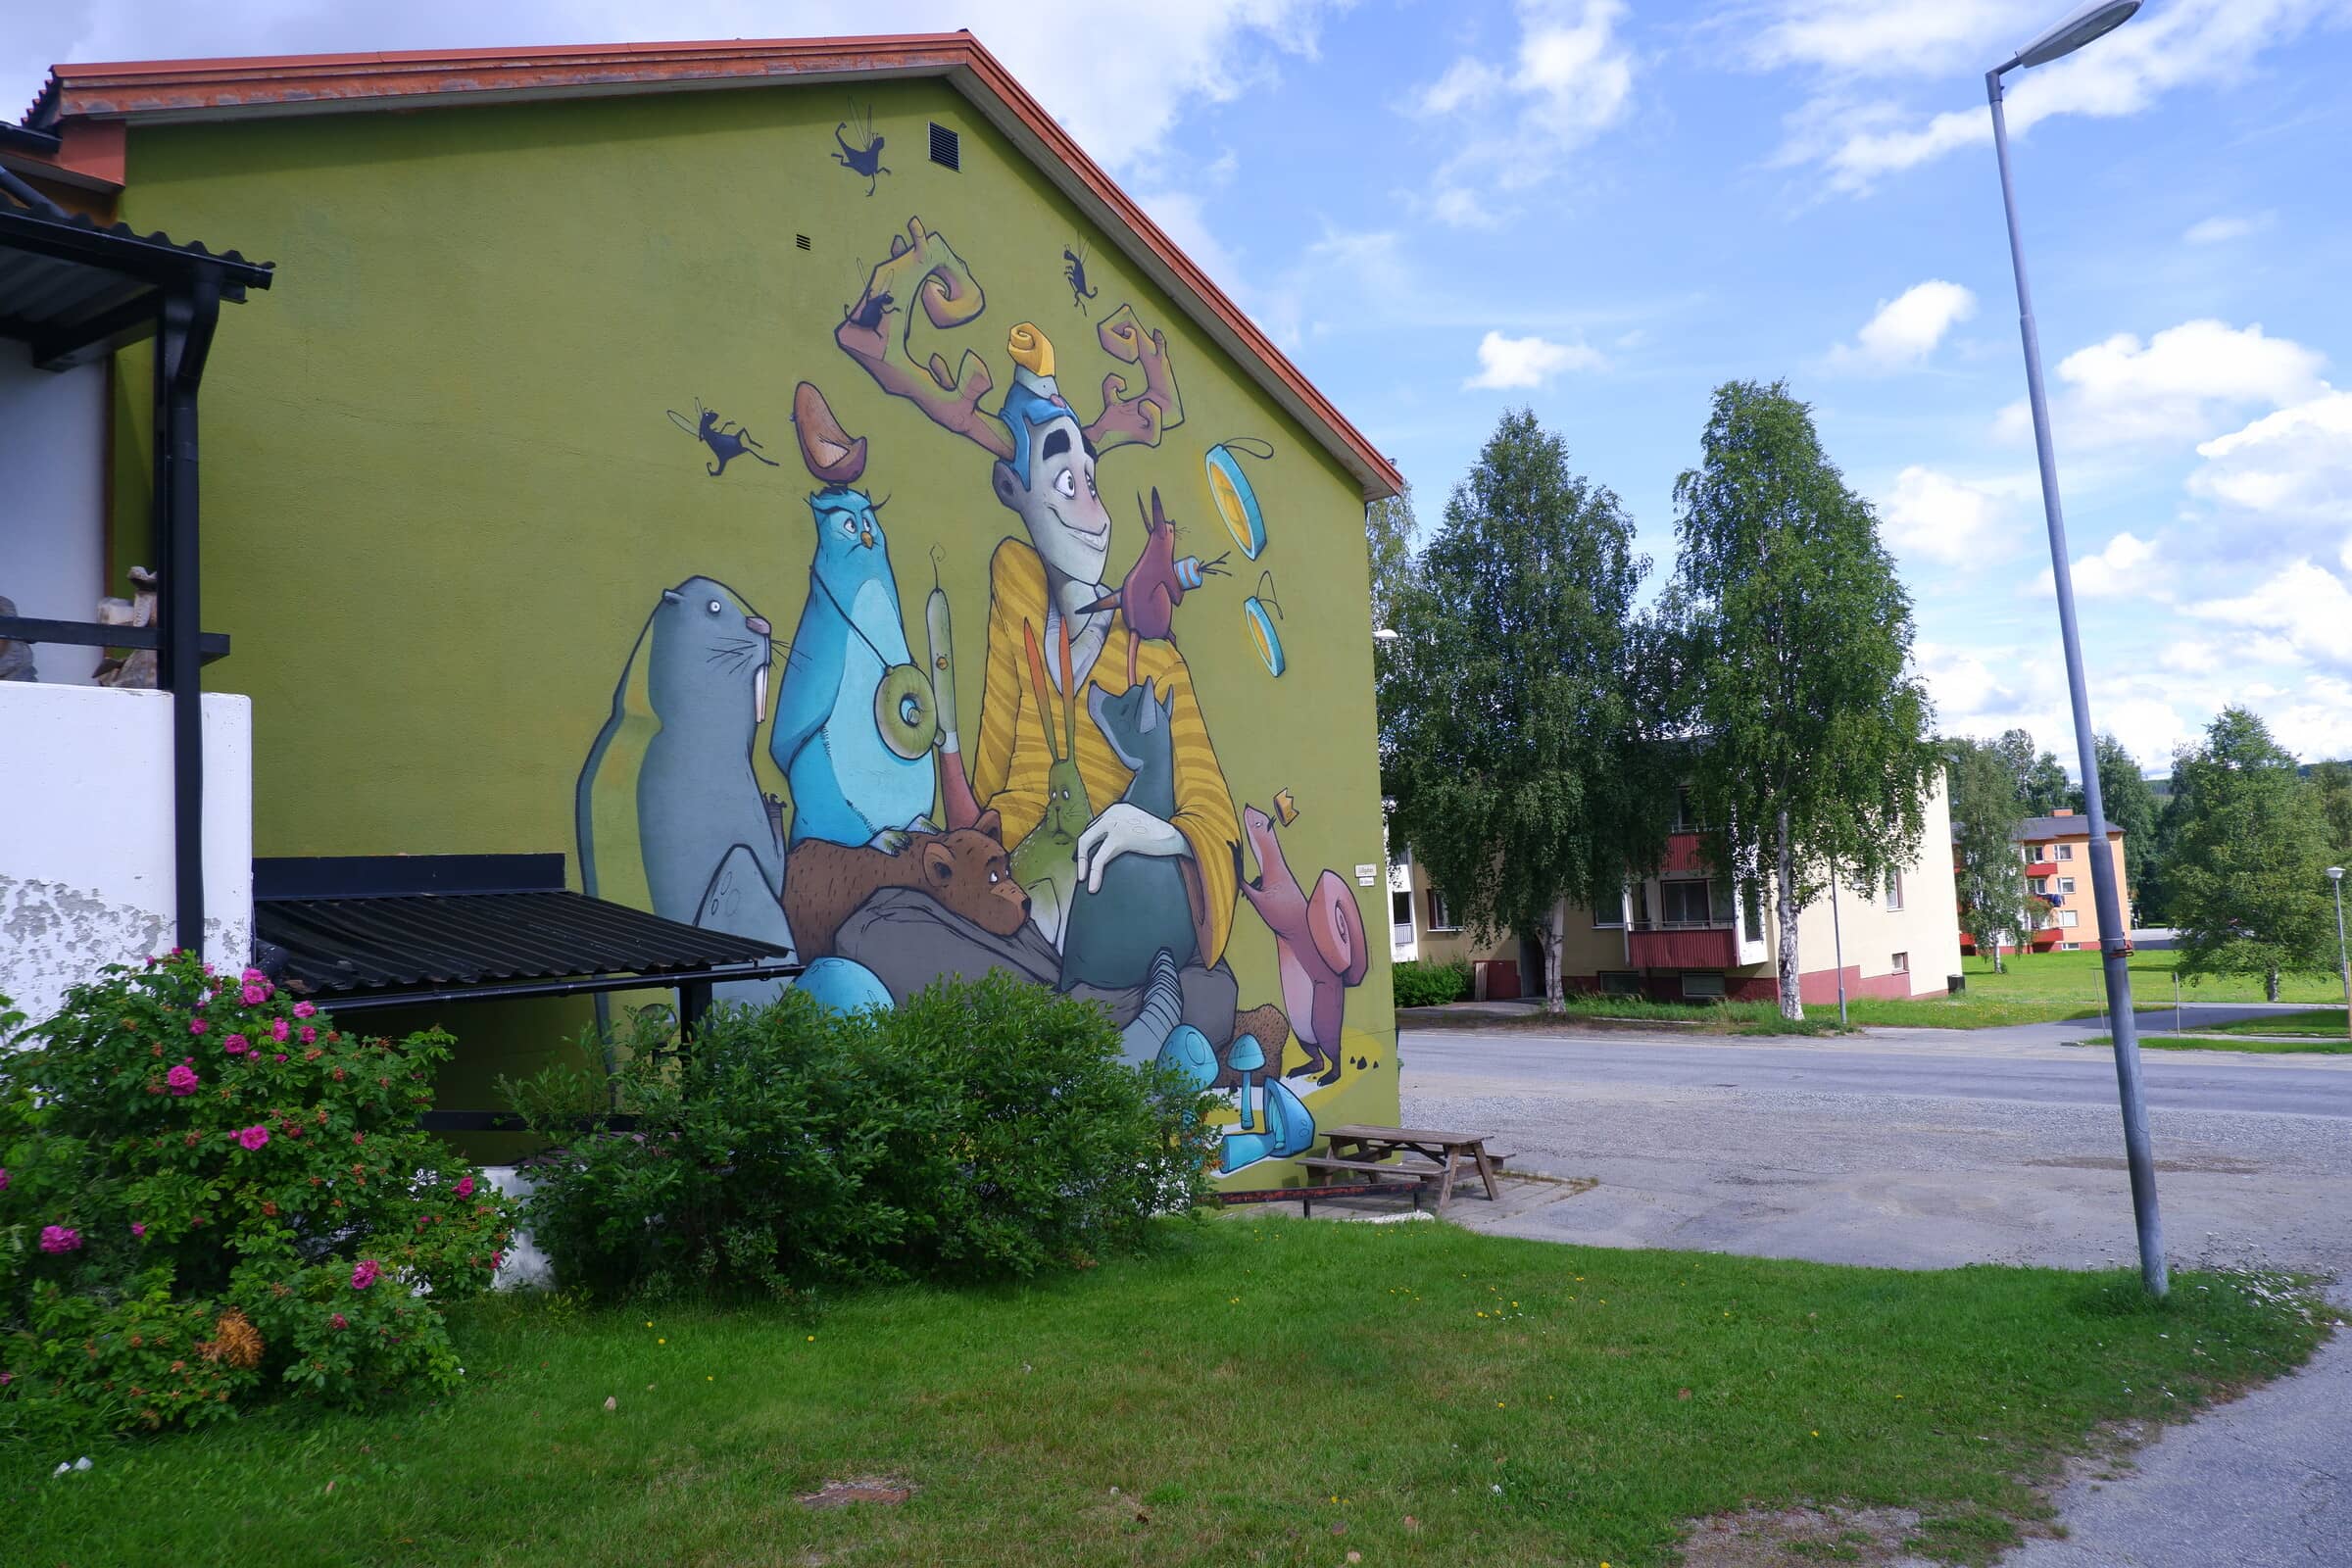 Big grafitti piece on the wall of the library in Åsele. It has a couple different stylized forest creatures.